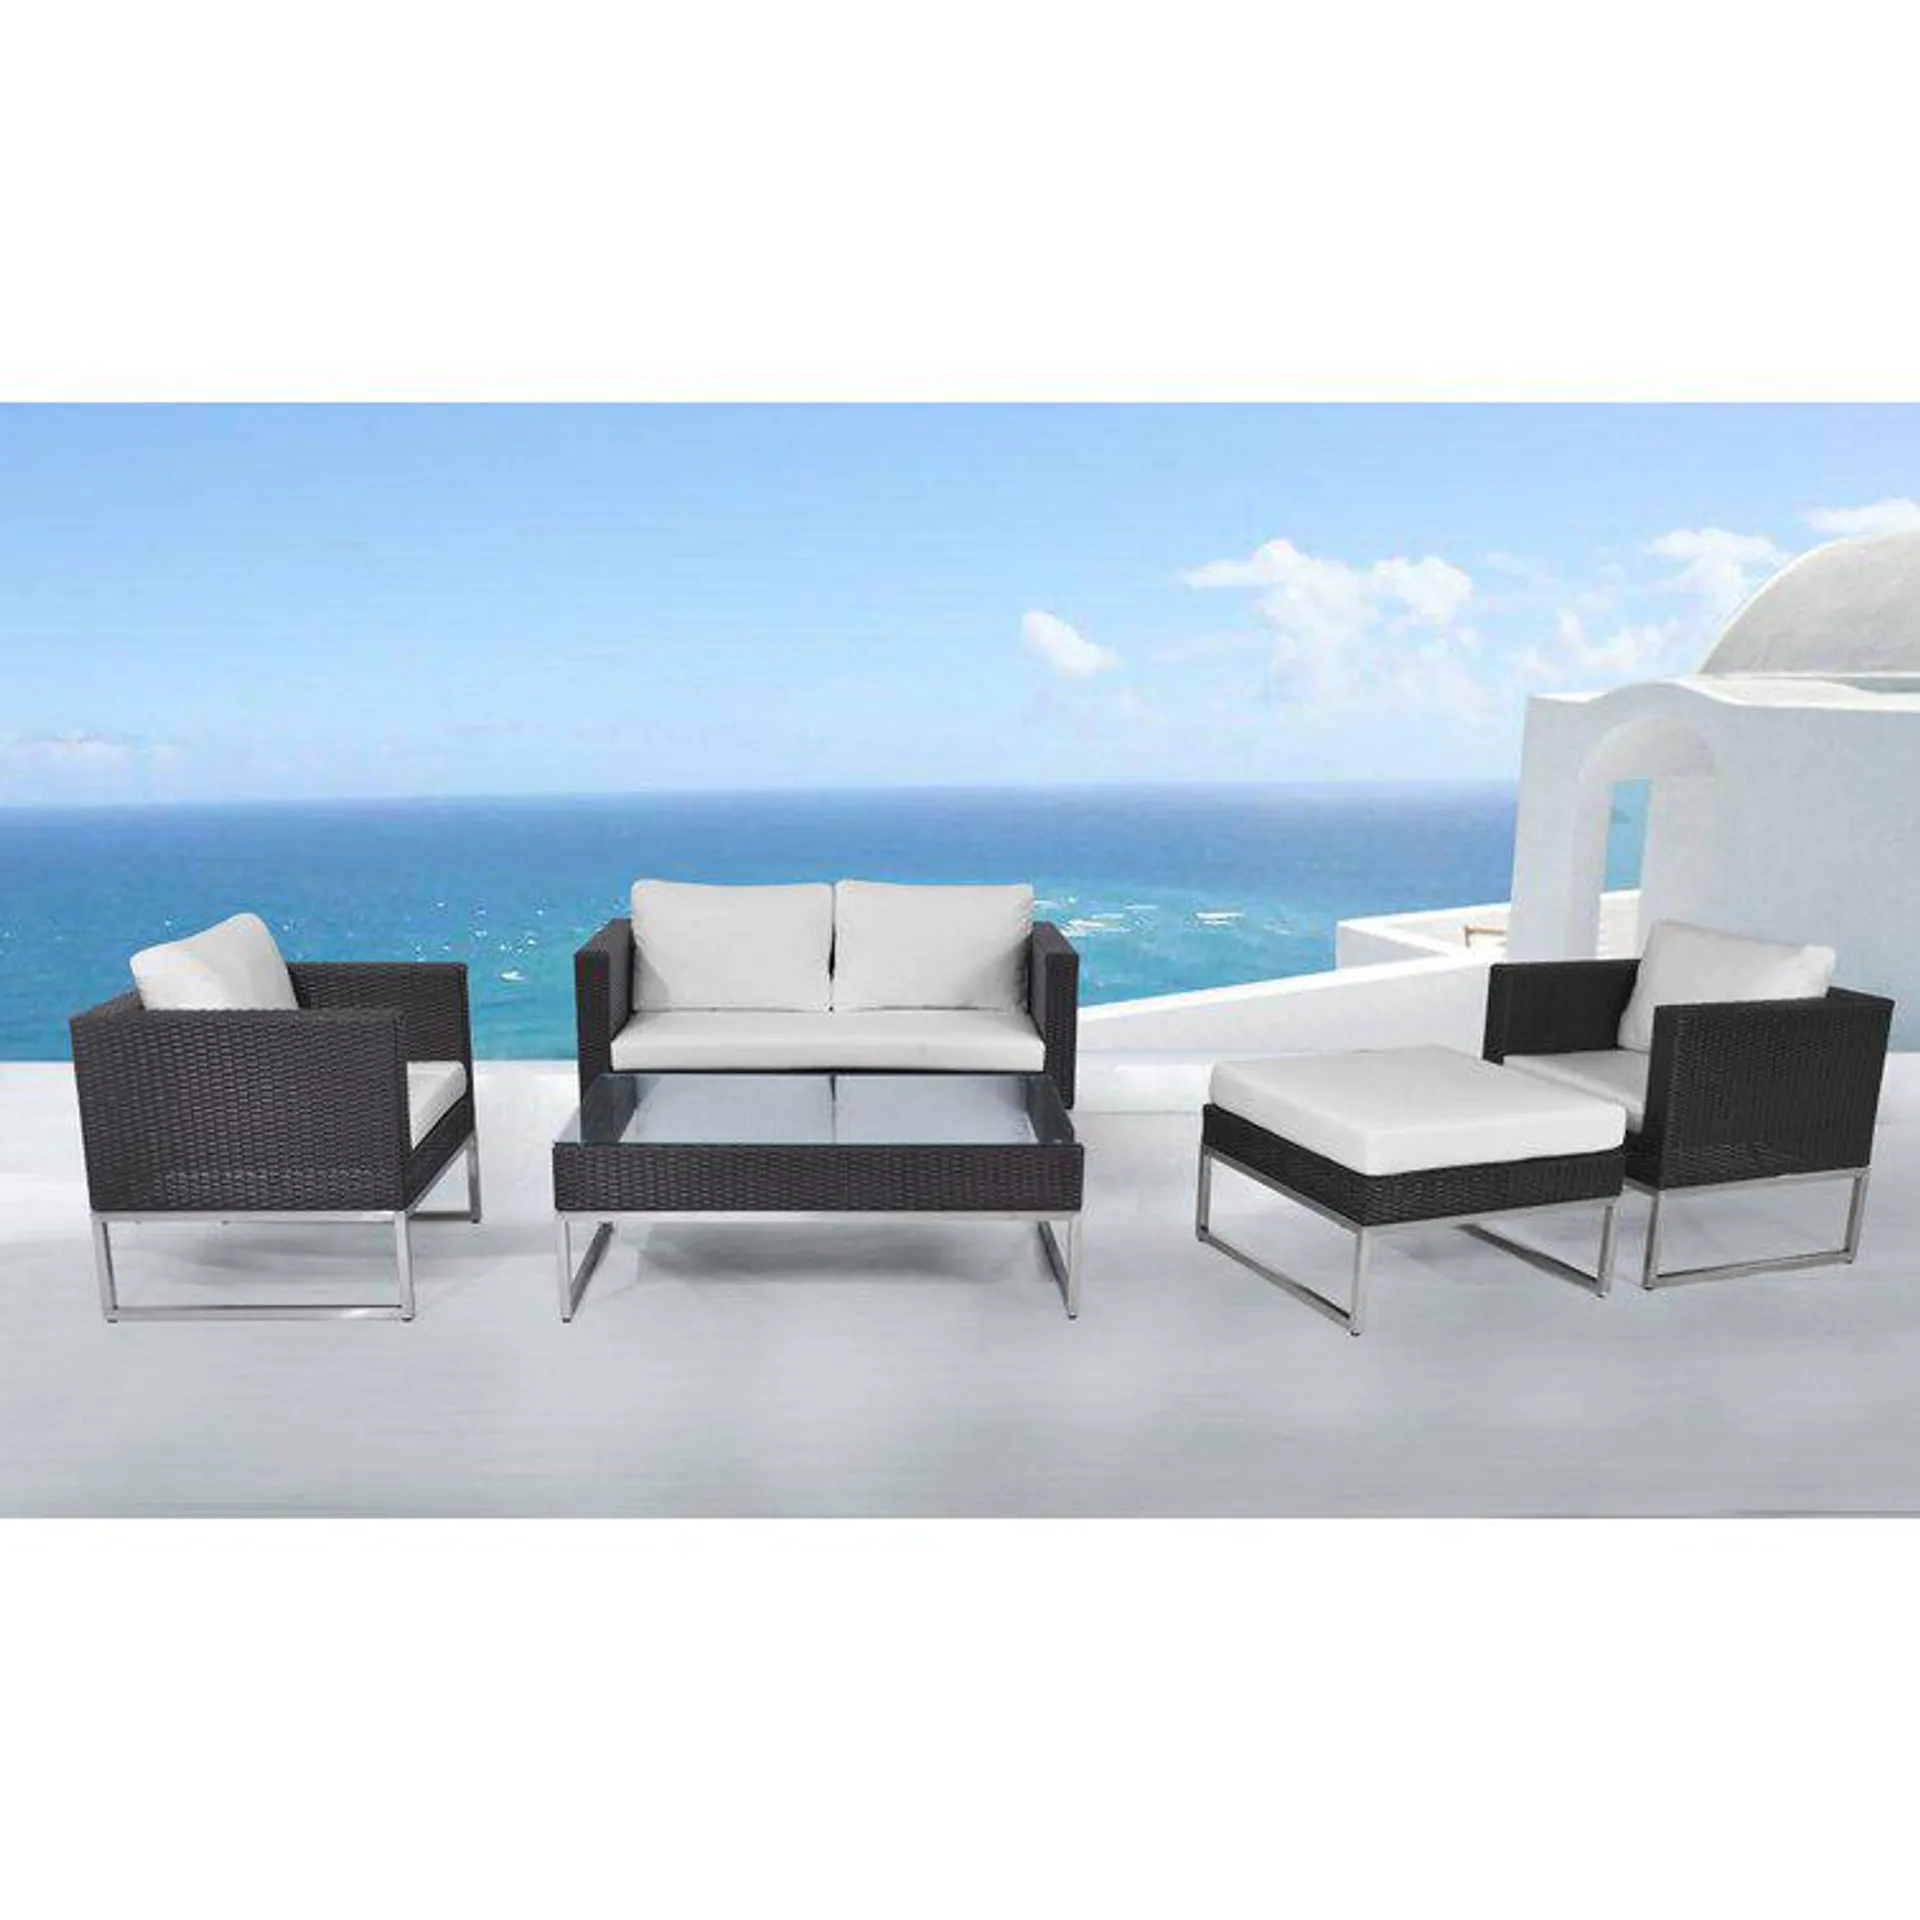 Citronelle 4 - Person Outdoor Seating Group with Cushions